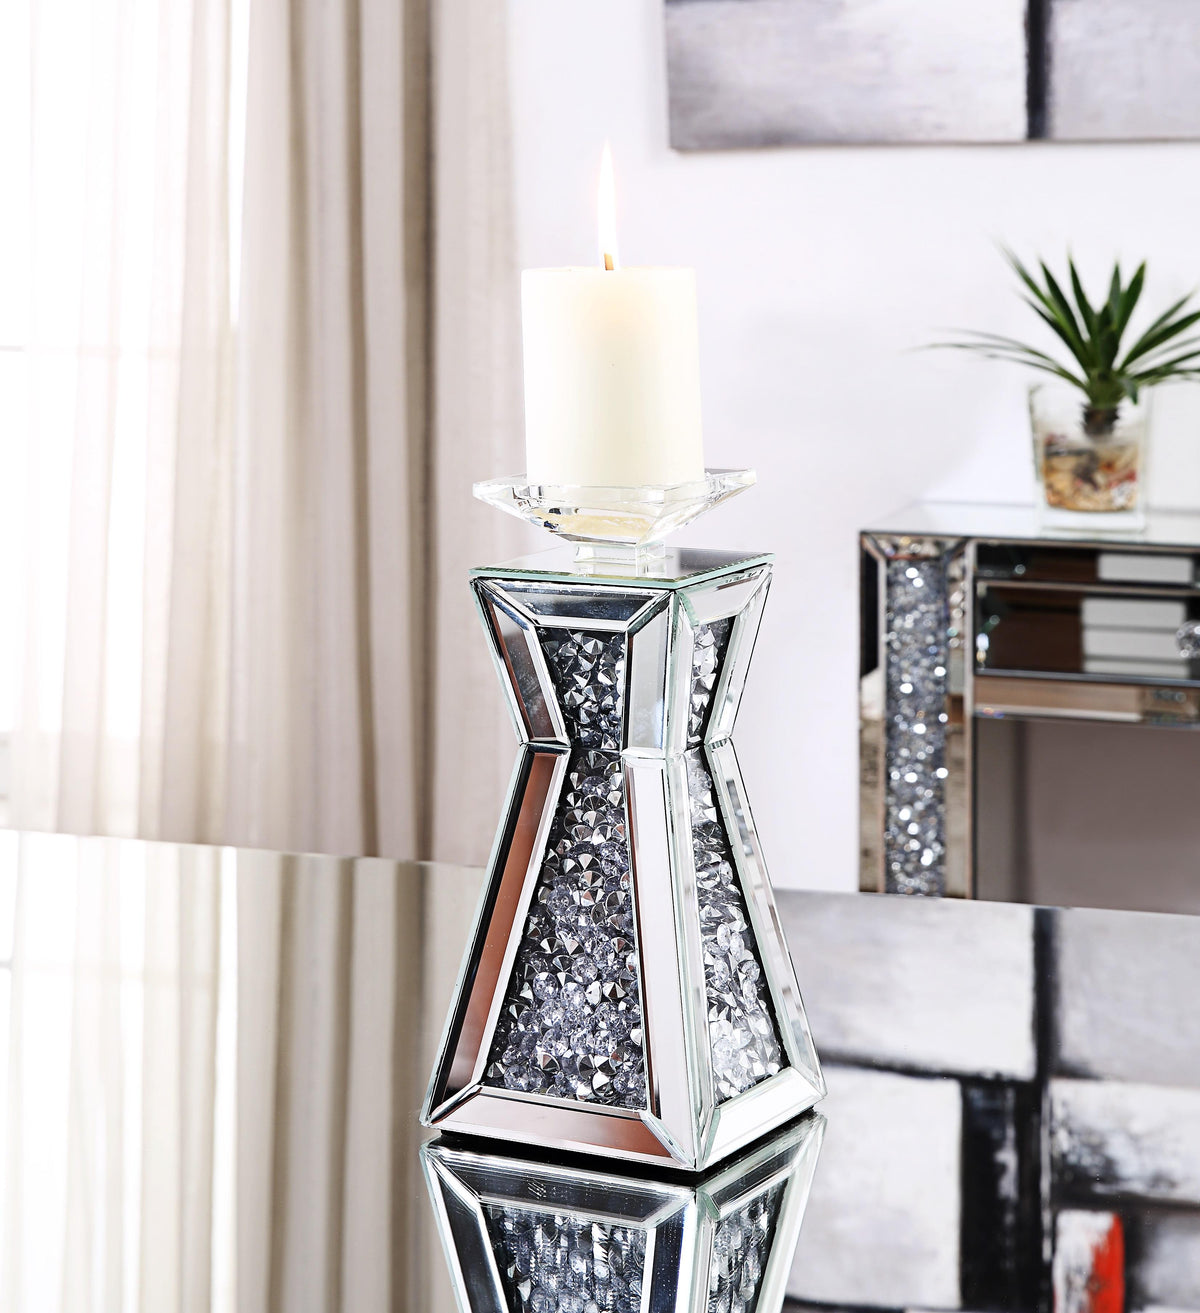 Nowles Mirrored & Faux Stones Accent Candleholder  Half Price Furniture